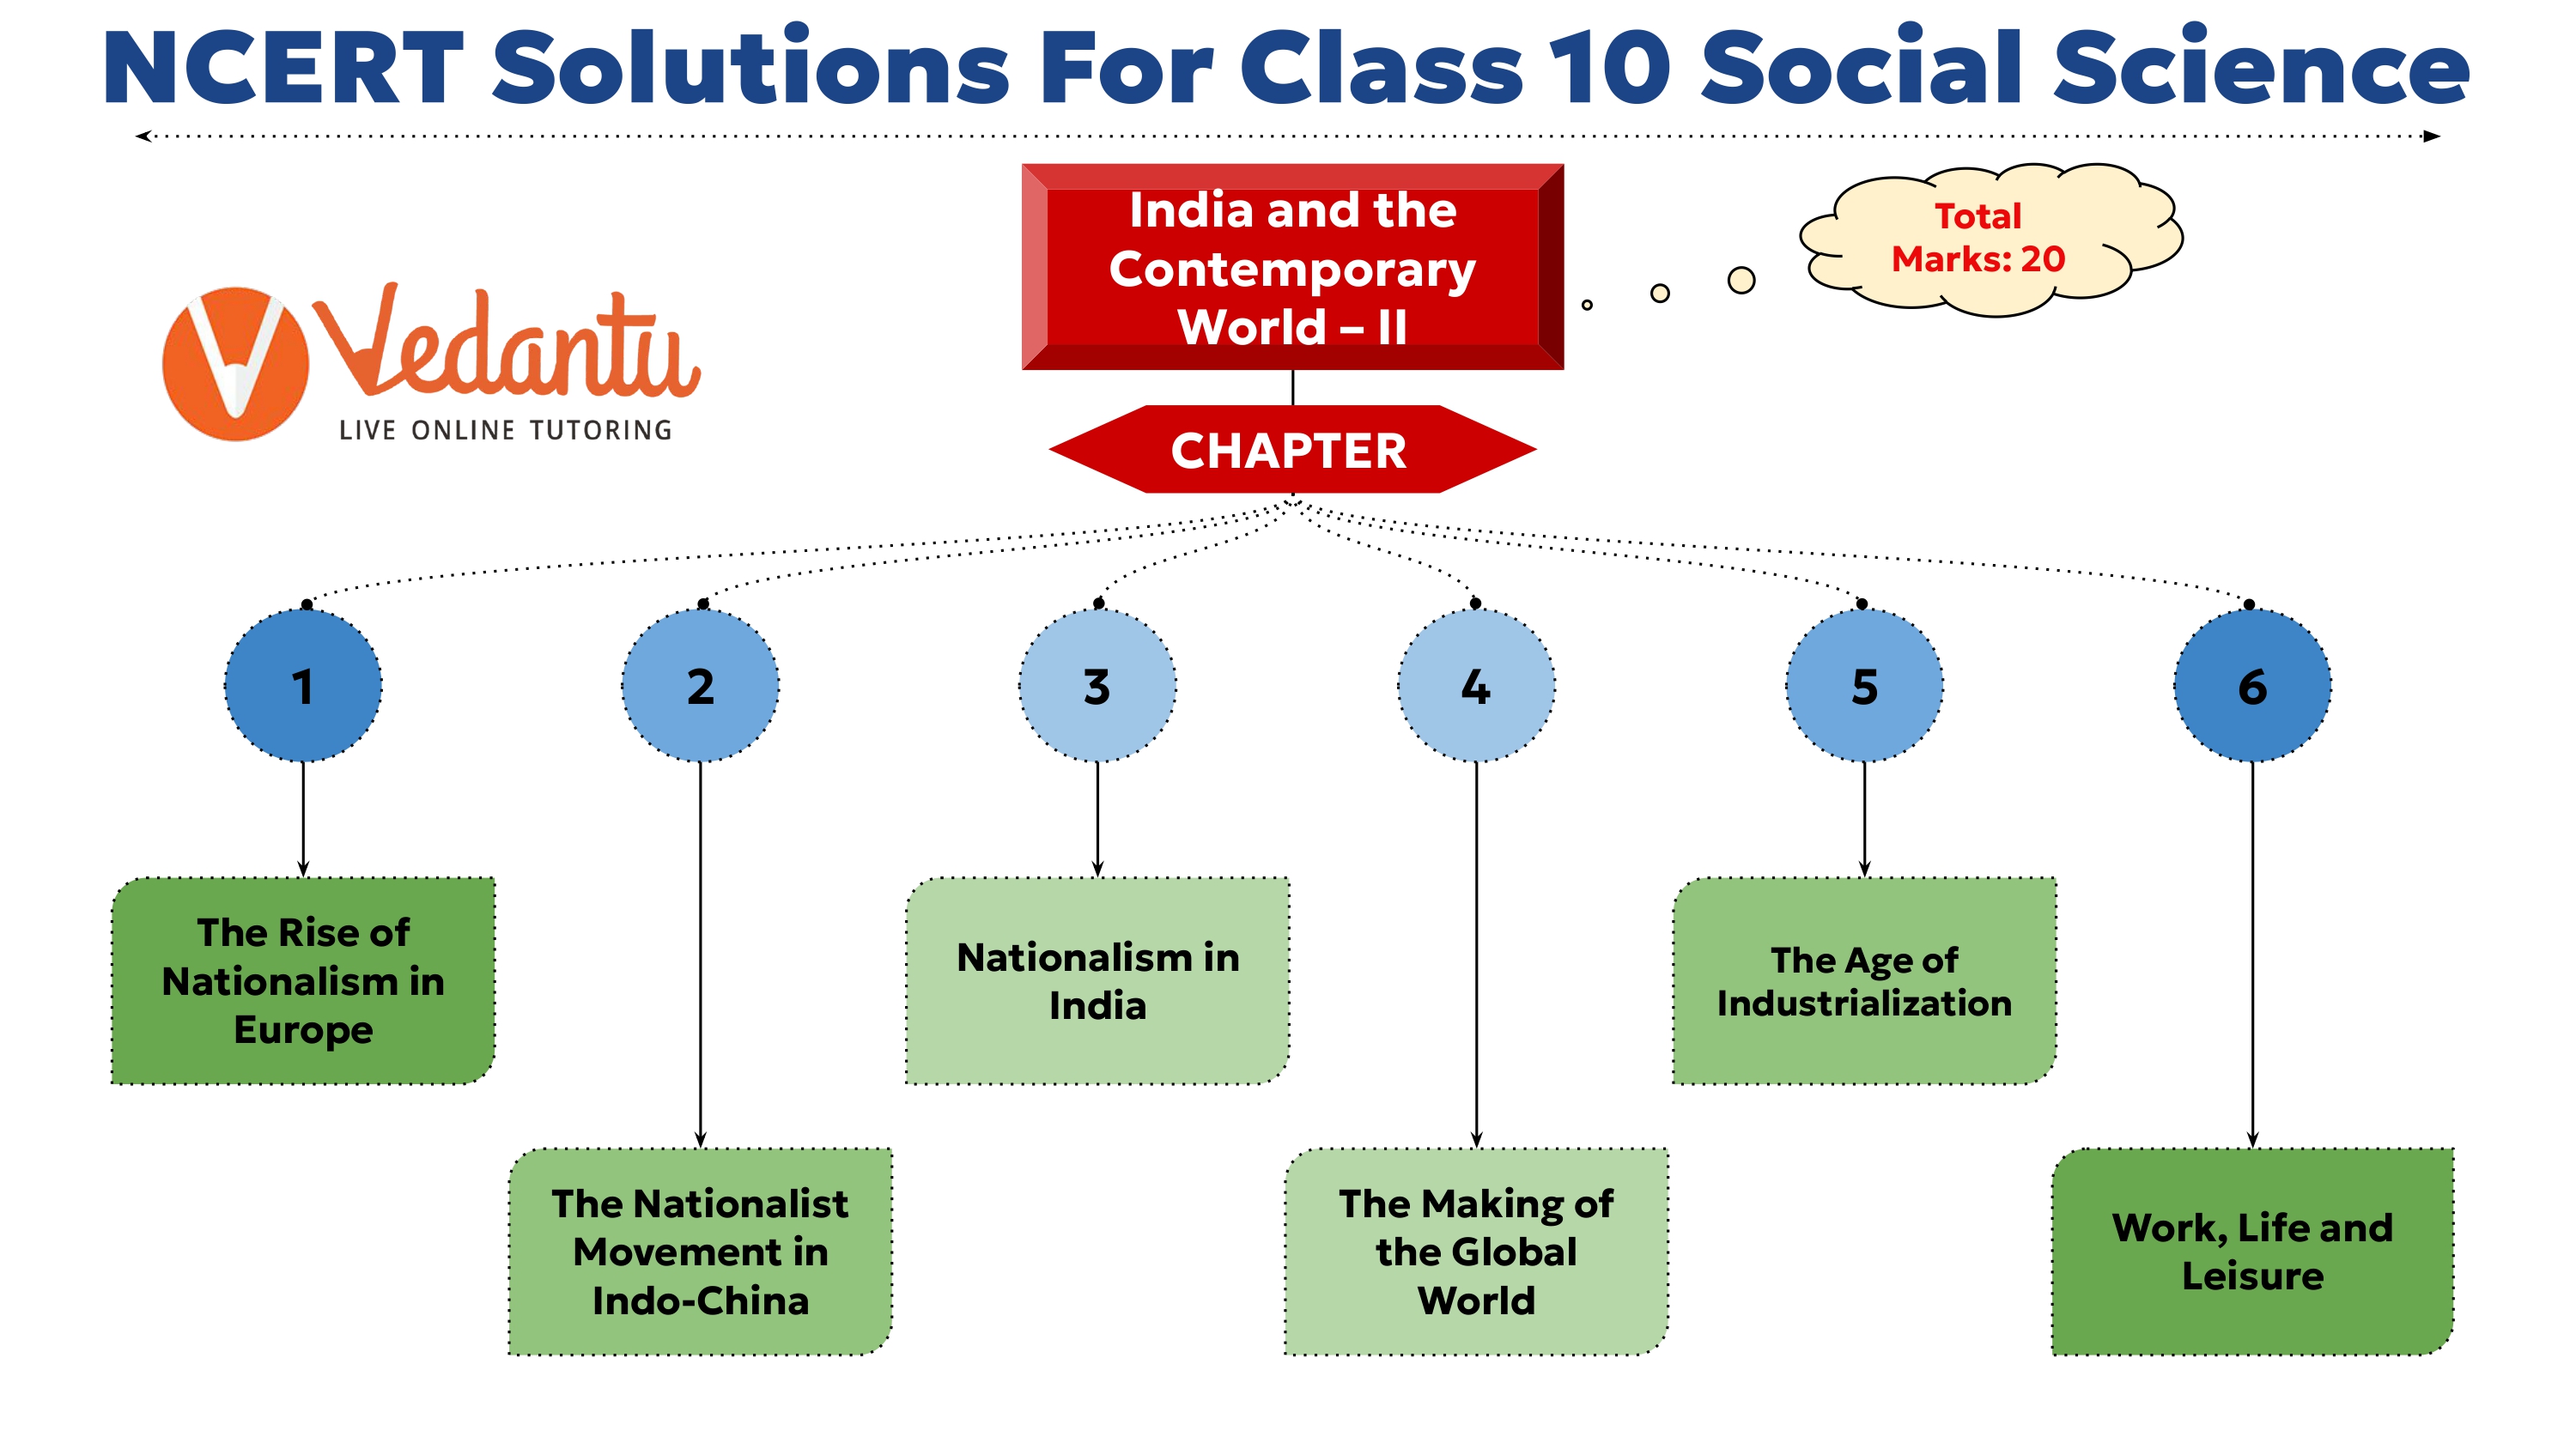 NCERT Solutions for Class 10 Social Science India and the Contemporary World-II Chapter wise List and Mark Distribution